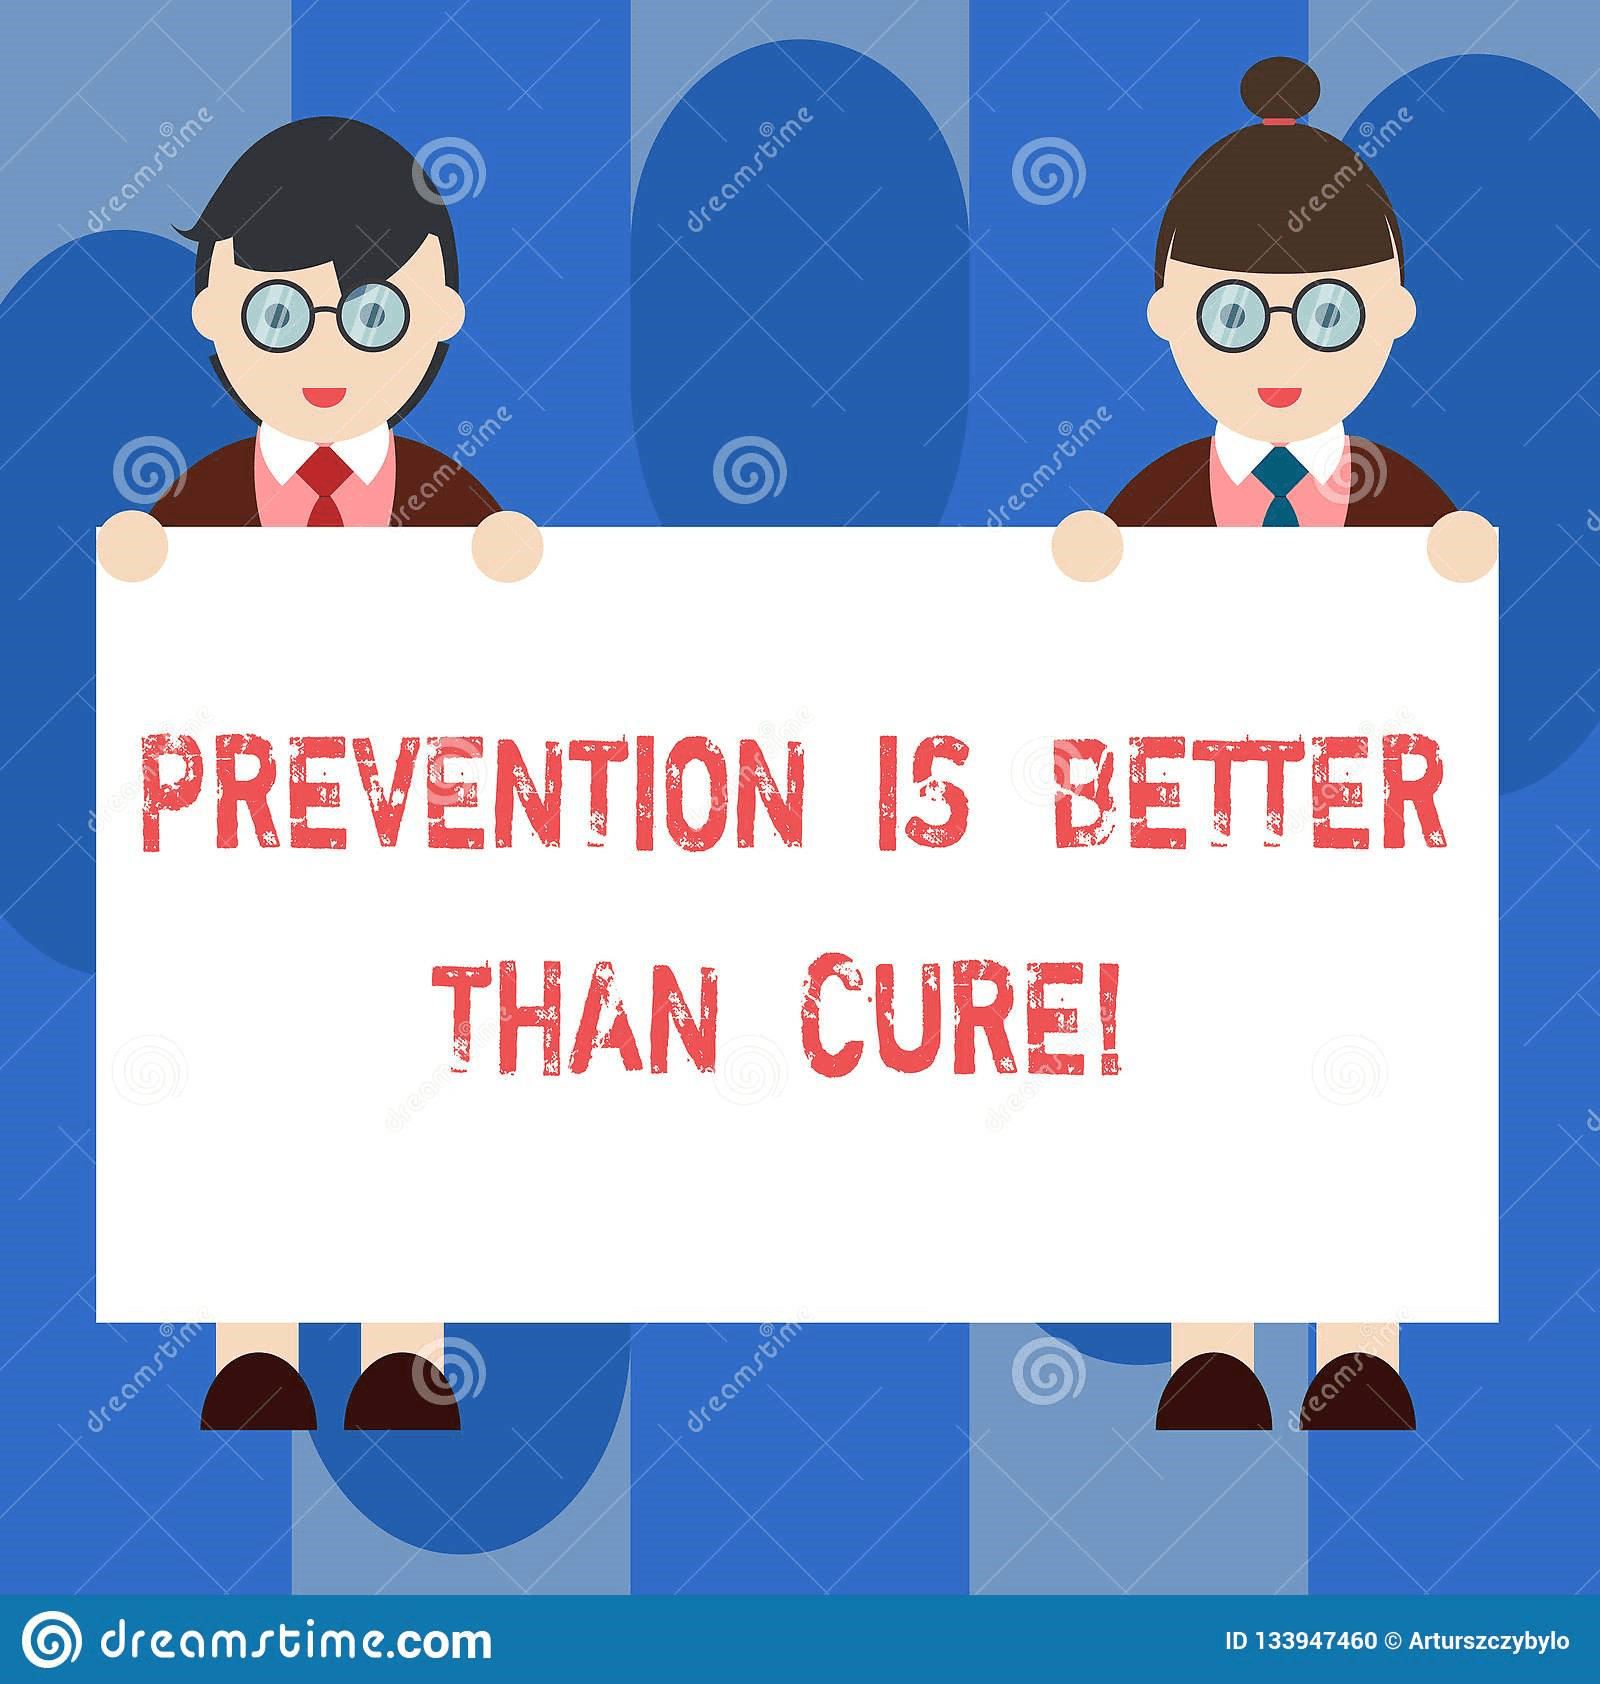 Prevention is Better Than Cure Essay